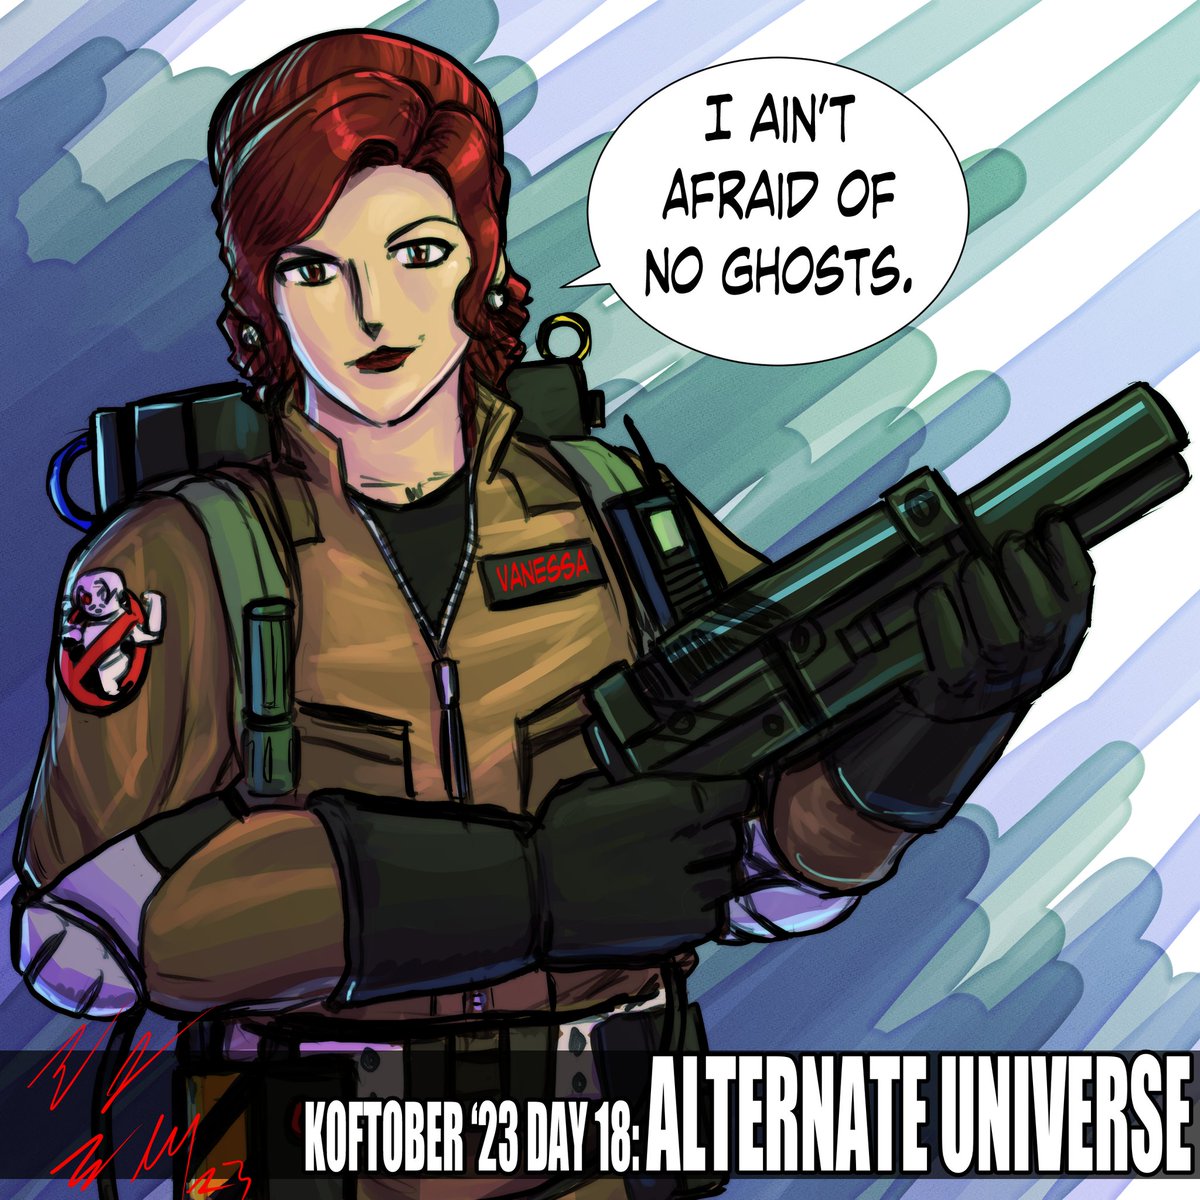 KOFTOBER '23 DAY18:
Alternate Universe.
Life is still Lifing, but I'm still going. Vanessa, as a ghostbuster, has been on my artlist for a while.
#KOFtober #vanessa #ghostbusters #kofxv #kof15 #fgc #fightinggames #fightinggamecommunity